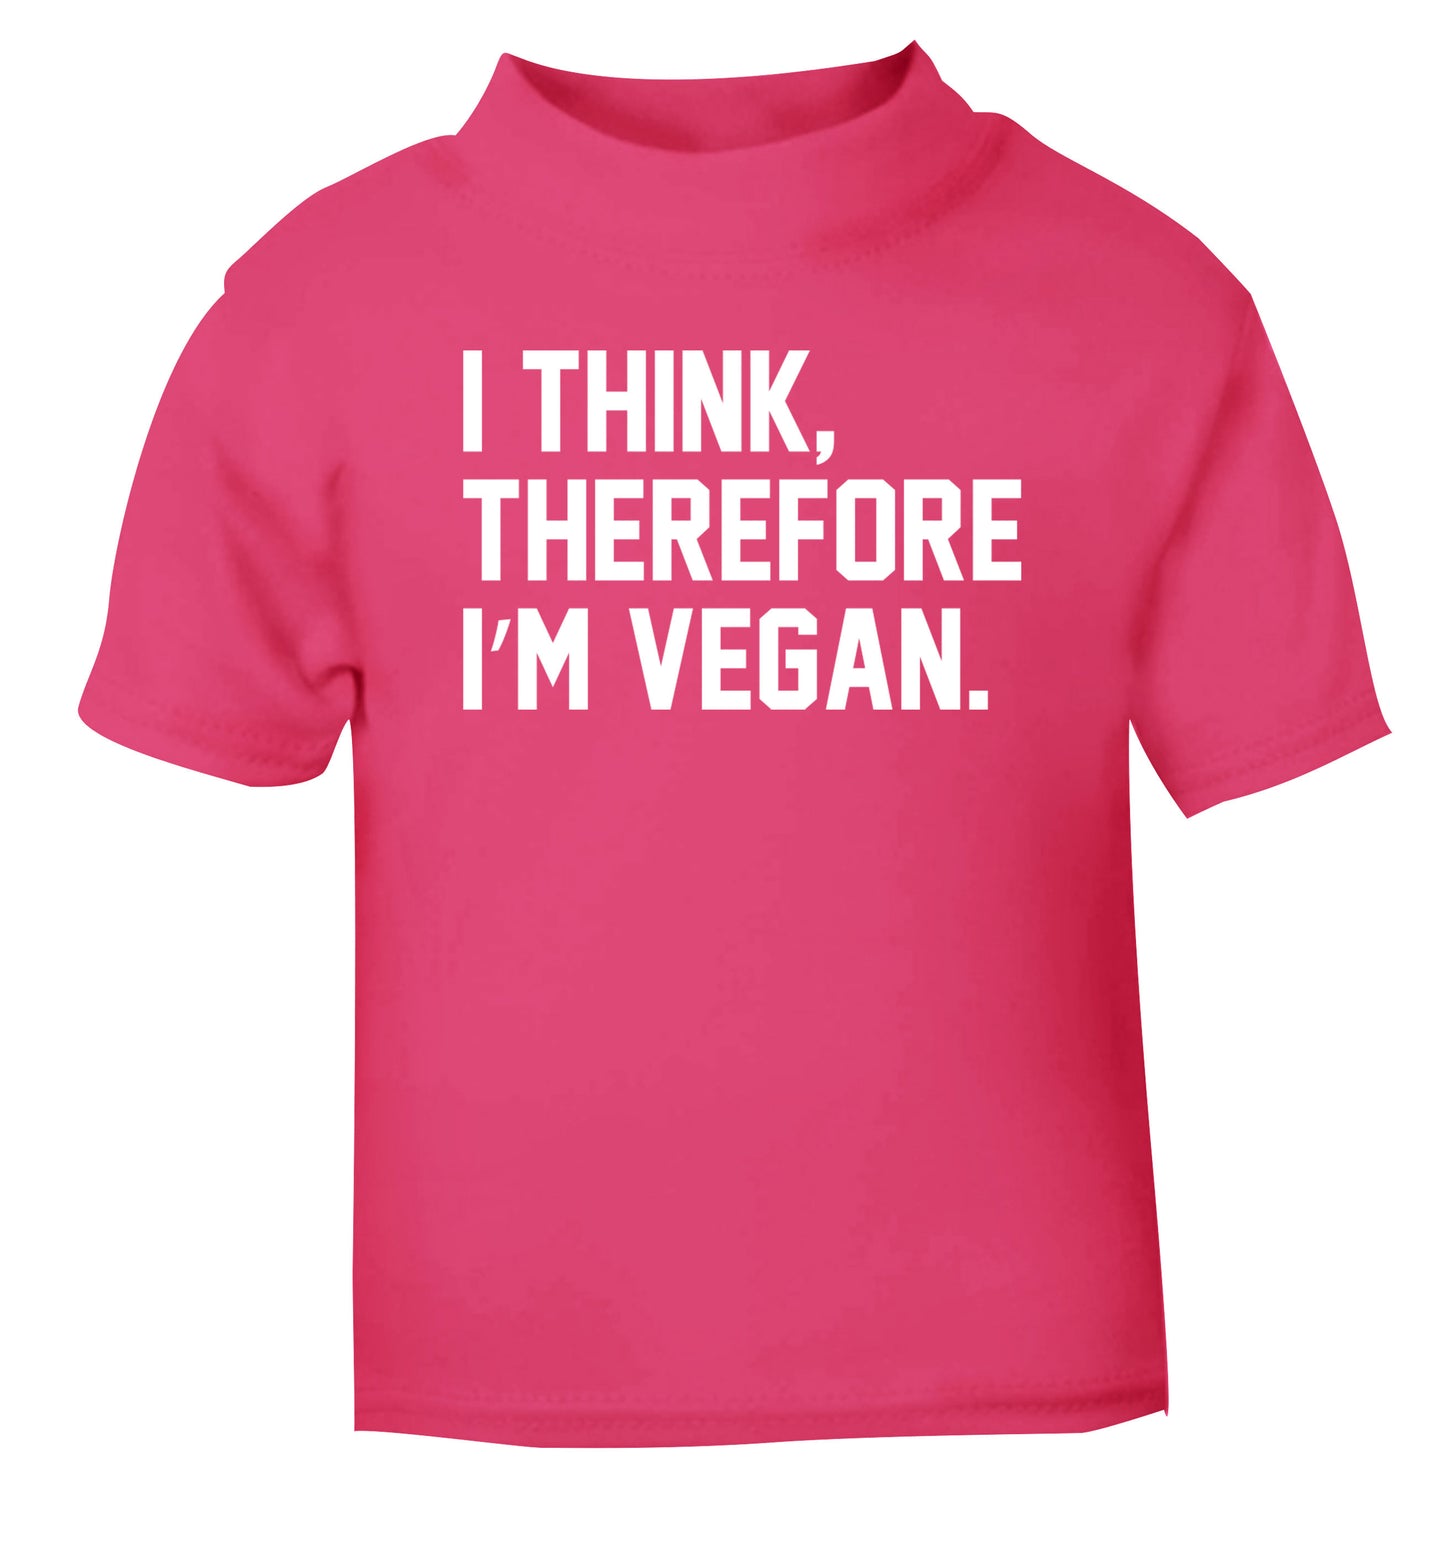 I think therefore I'm vegan pink Baby Toddler Tshirt 2 Years